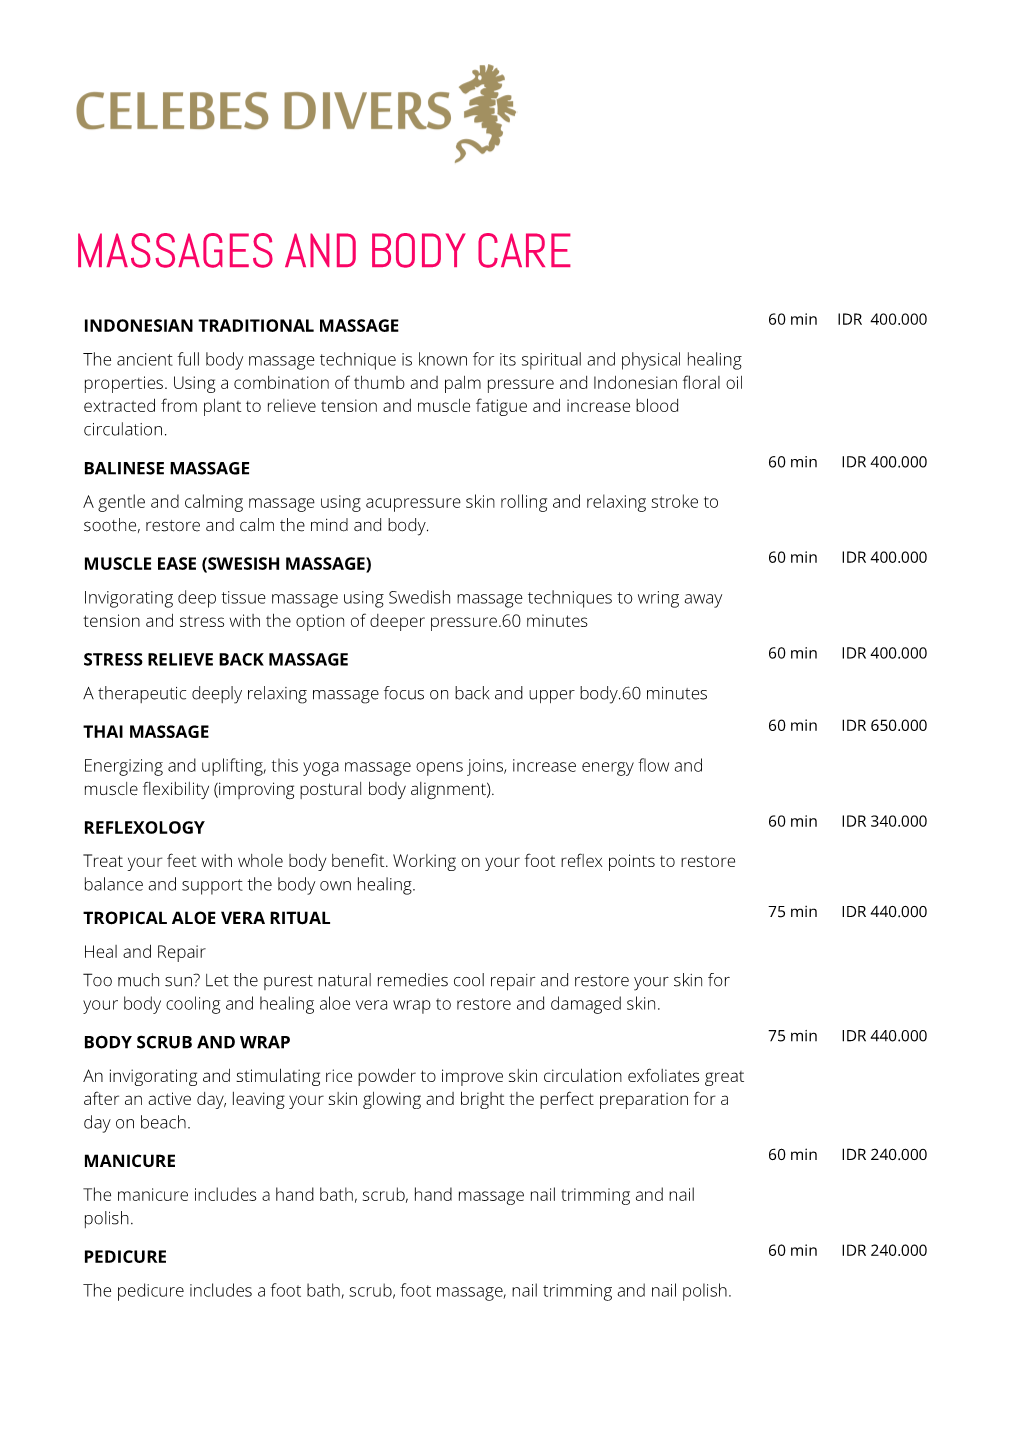 Massages and Bodycare